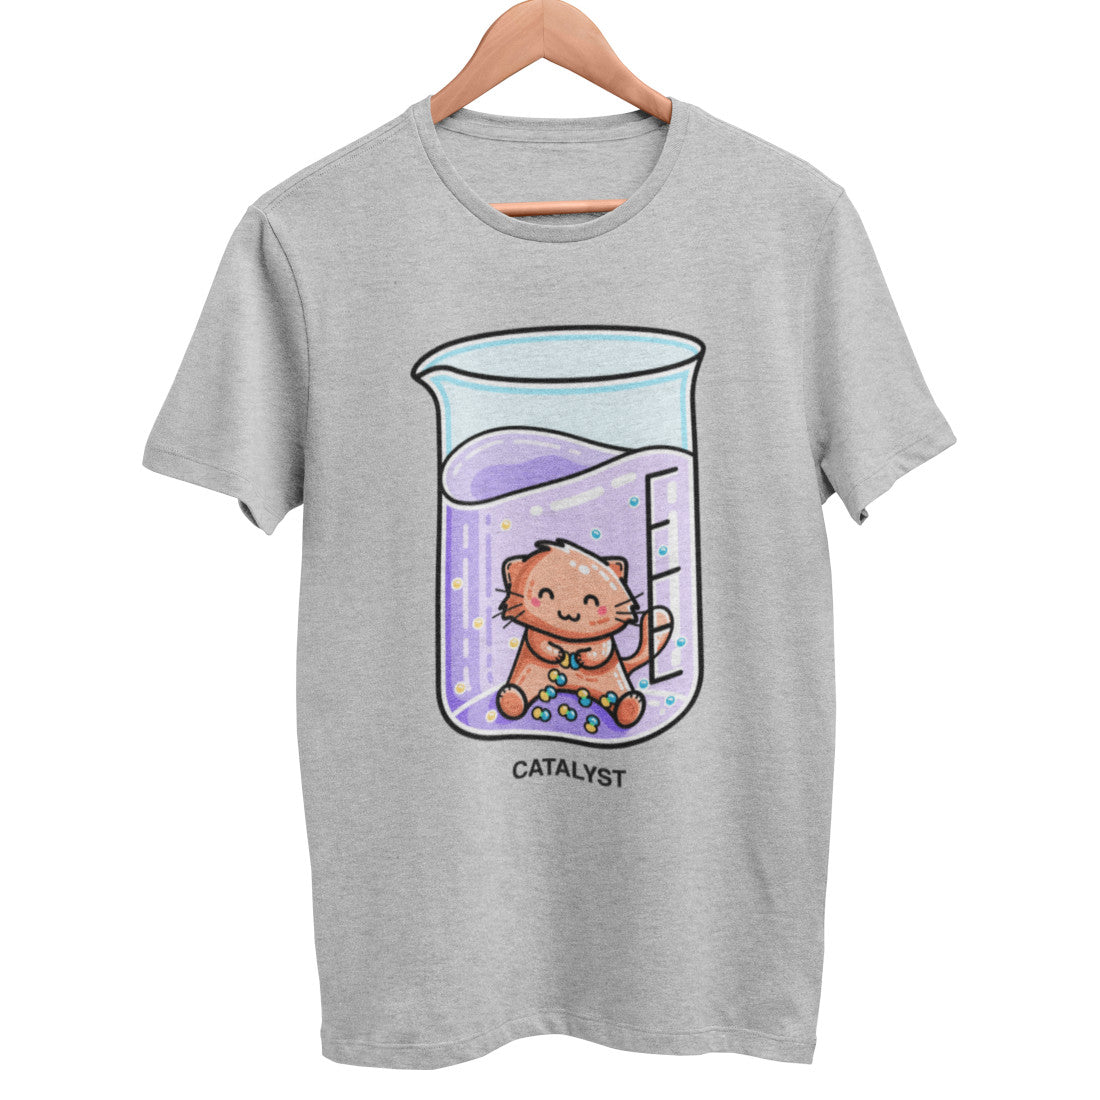 A heather grey unisex crewneck t-shirt on a hanger with a design on its chest of a cute ginger cat sitting in a chemistry beaker of purple liquid joining atoms or yellow and green together